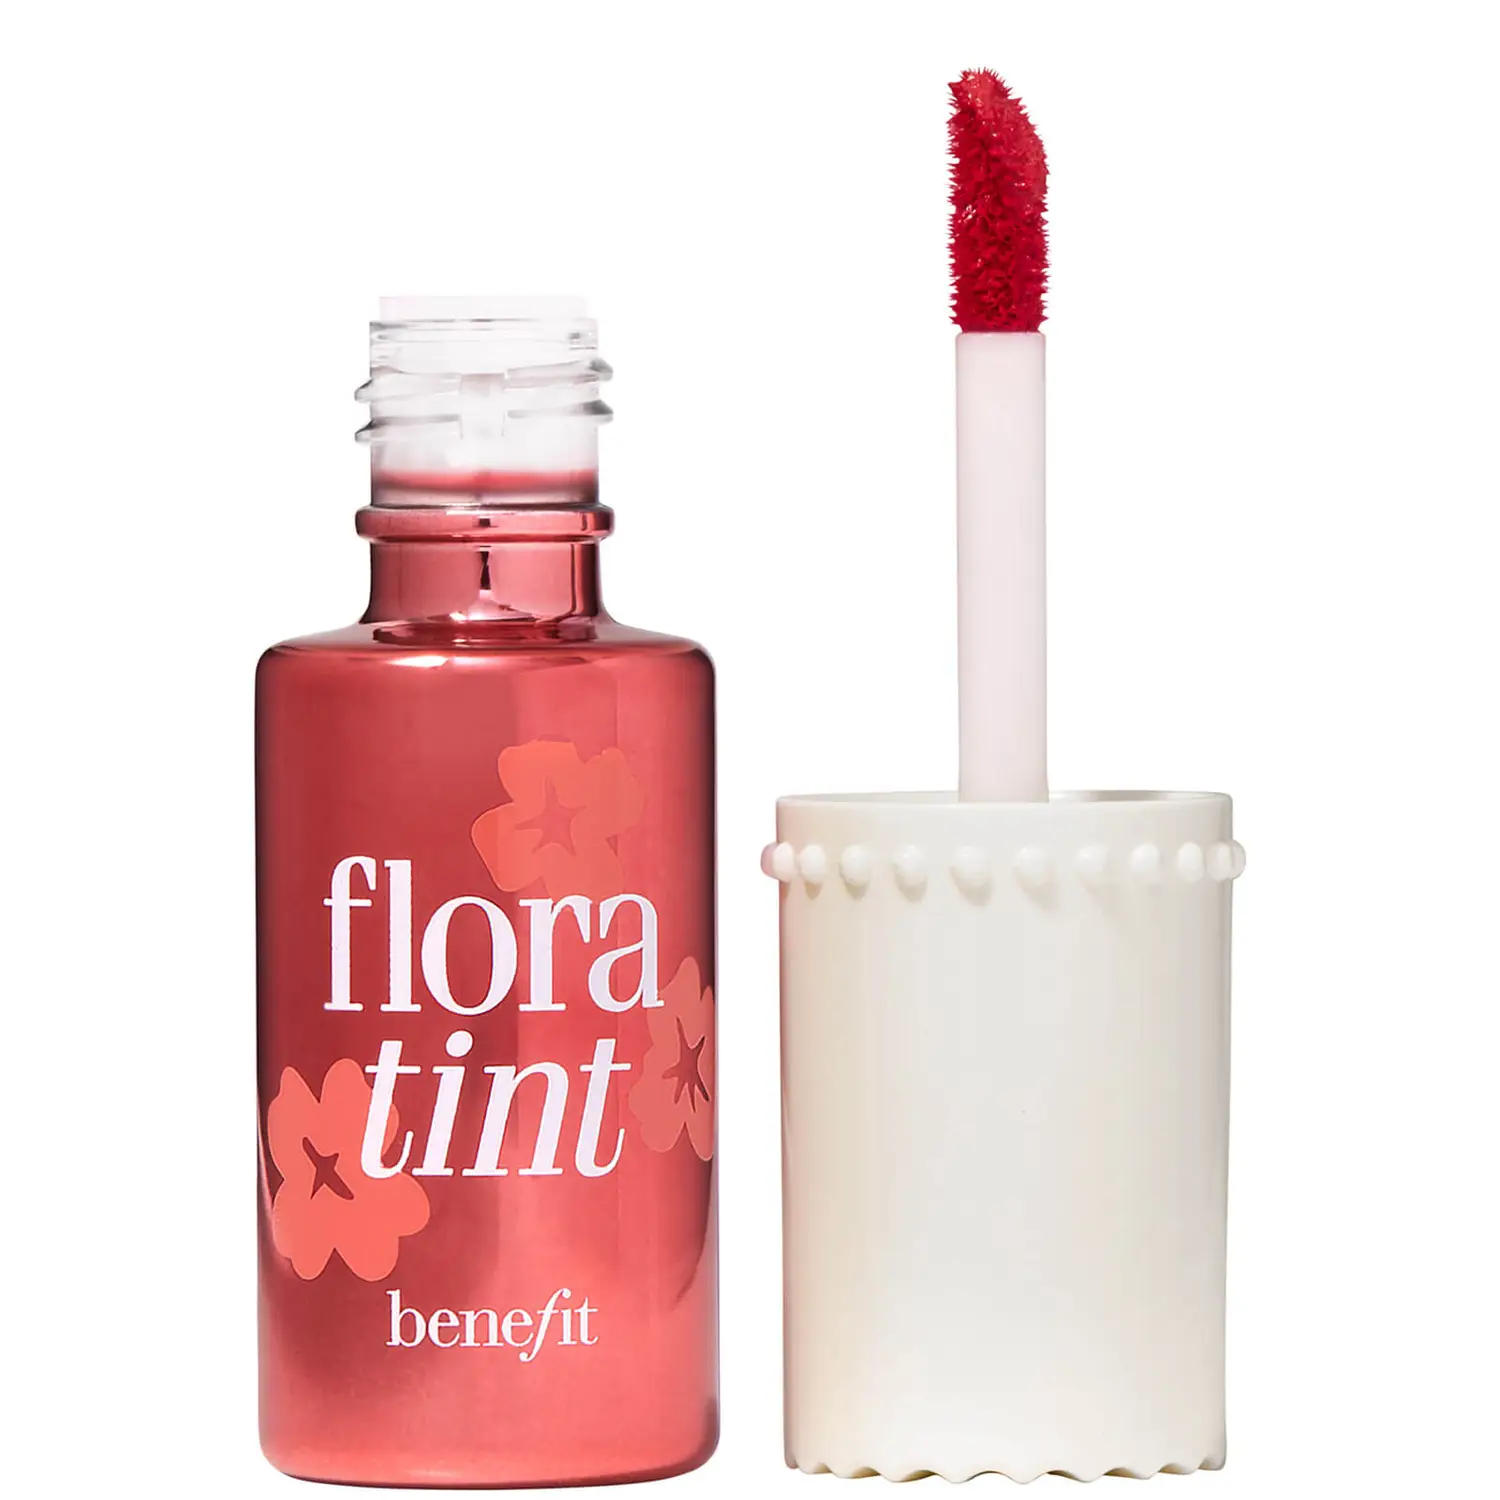 benefit Floratint Desert Rose-Tinted Lip and Cheek Tint 6ml A multi-performing rose-coloured skin tint for the cheeks and lips. £12.00